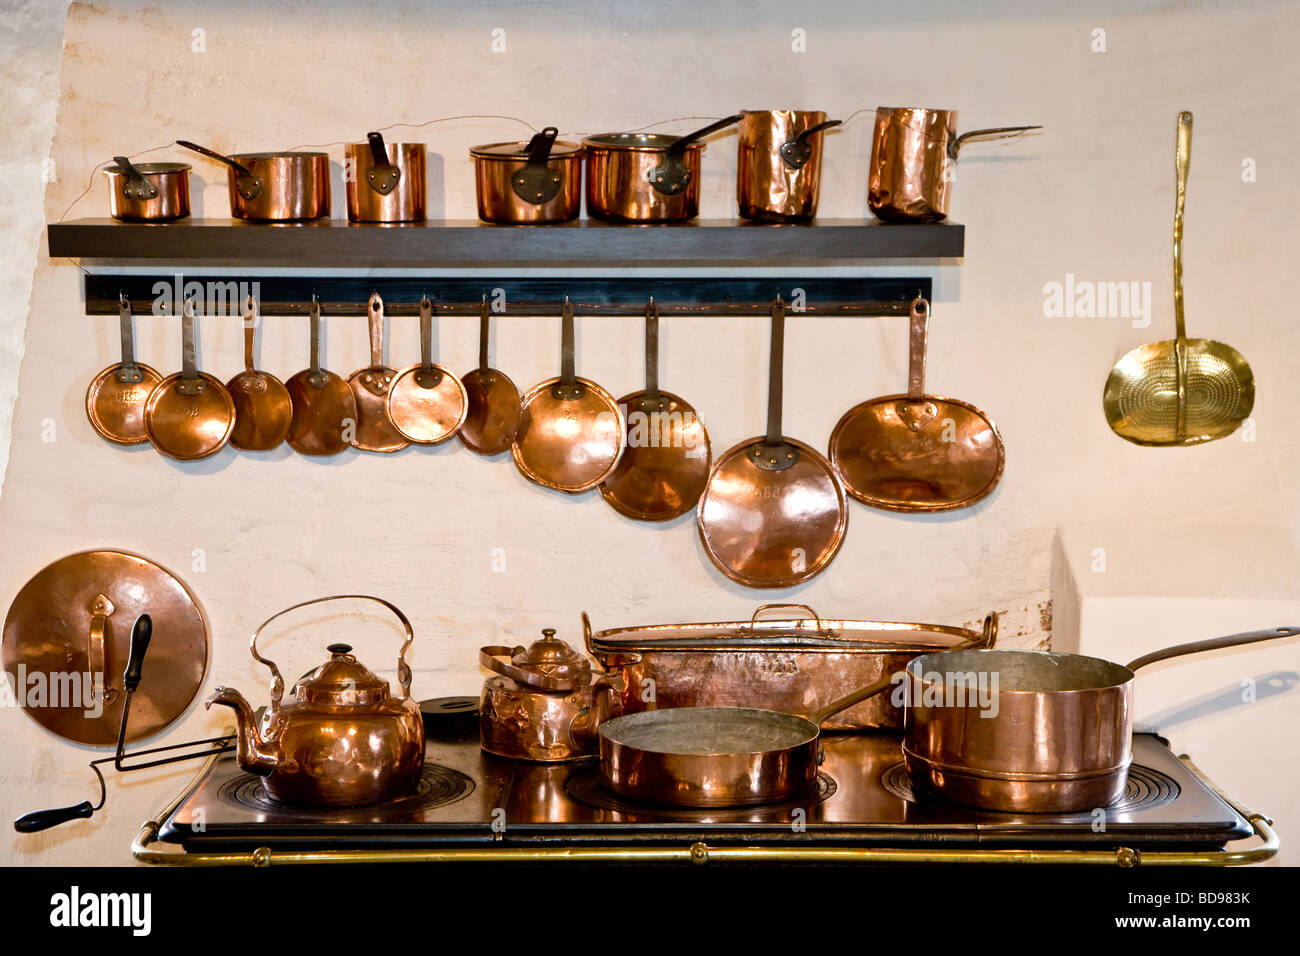 Old Copper Kitchen Equipment Stock Photo Royalty Free Image